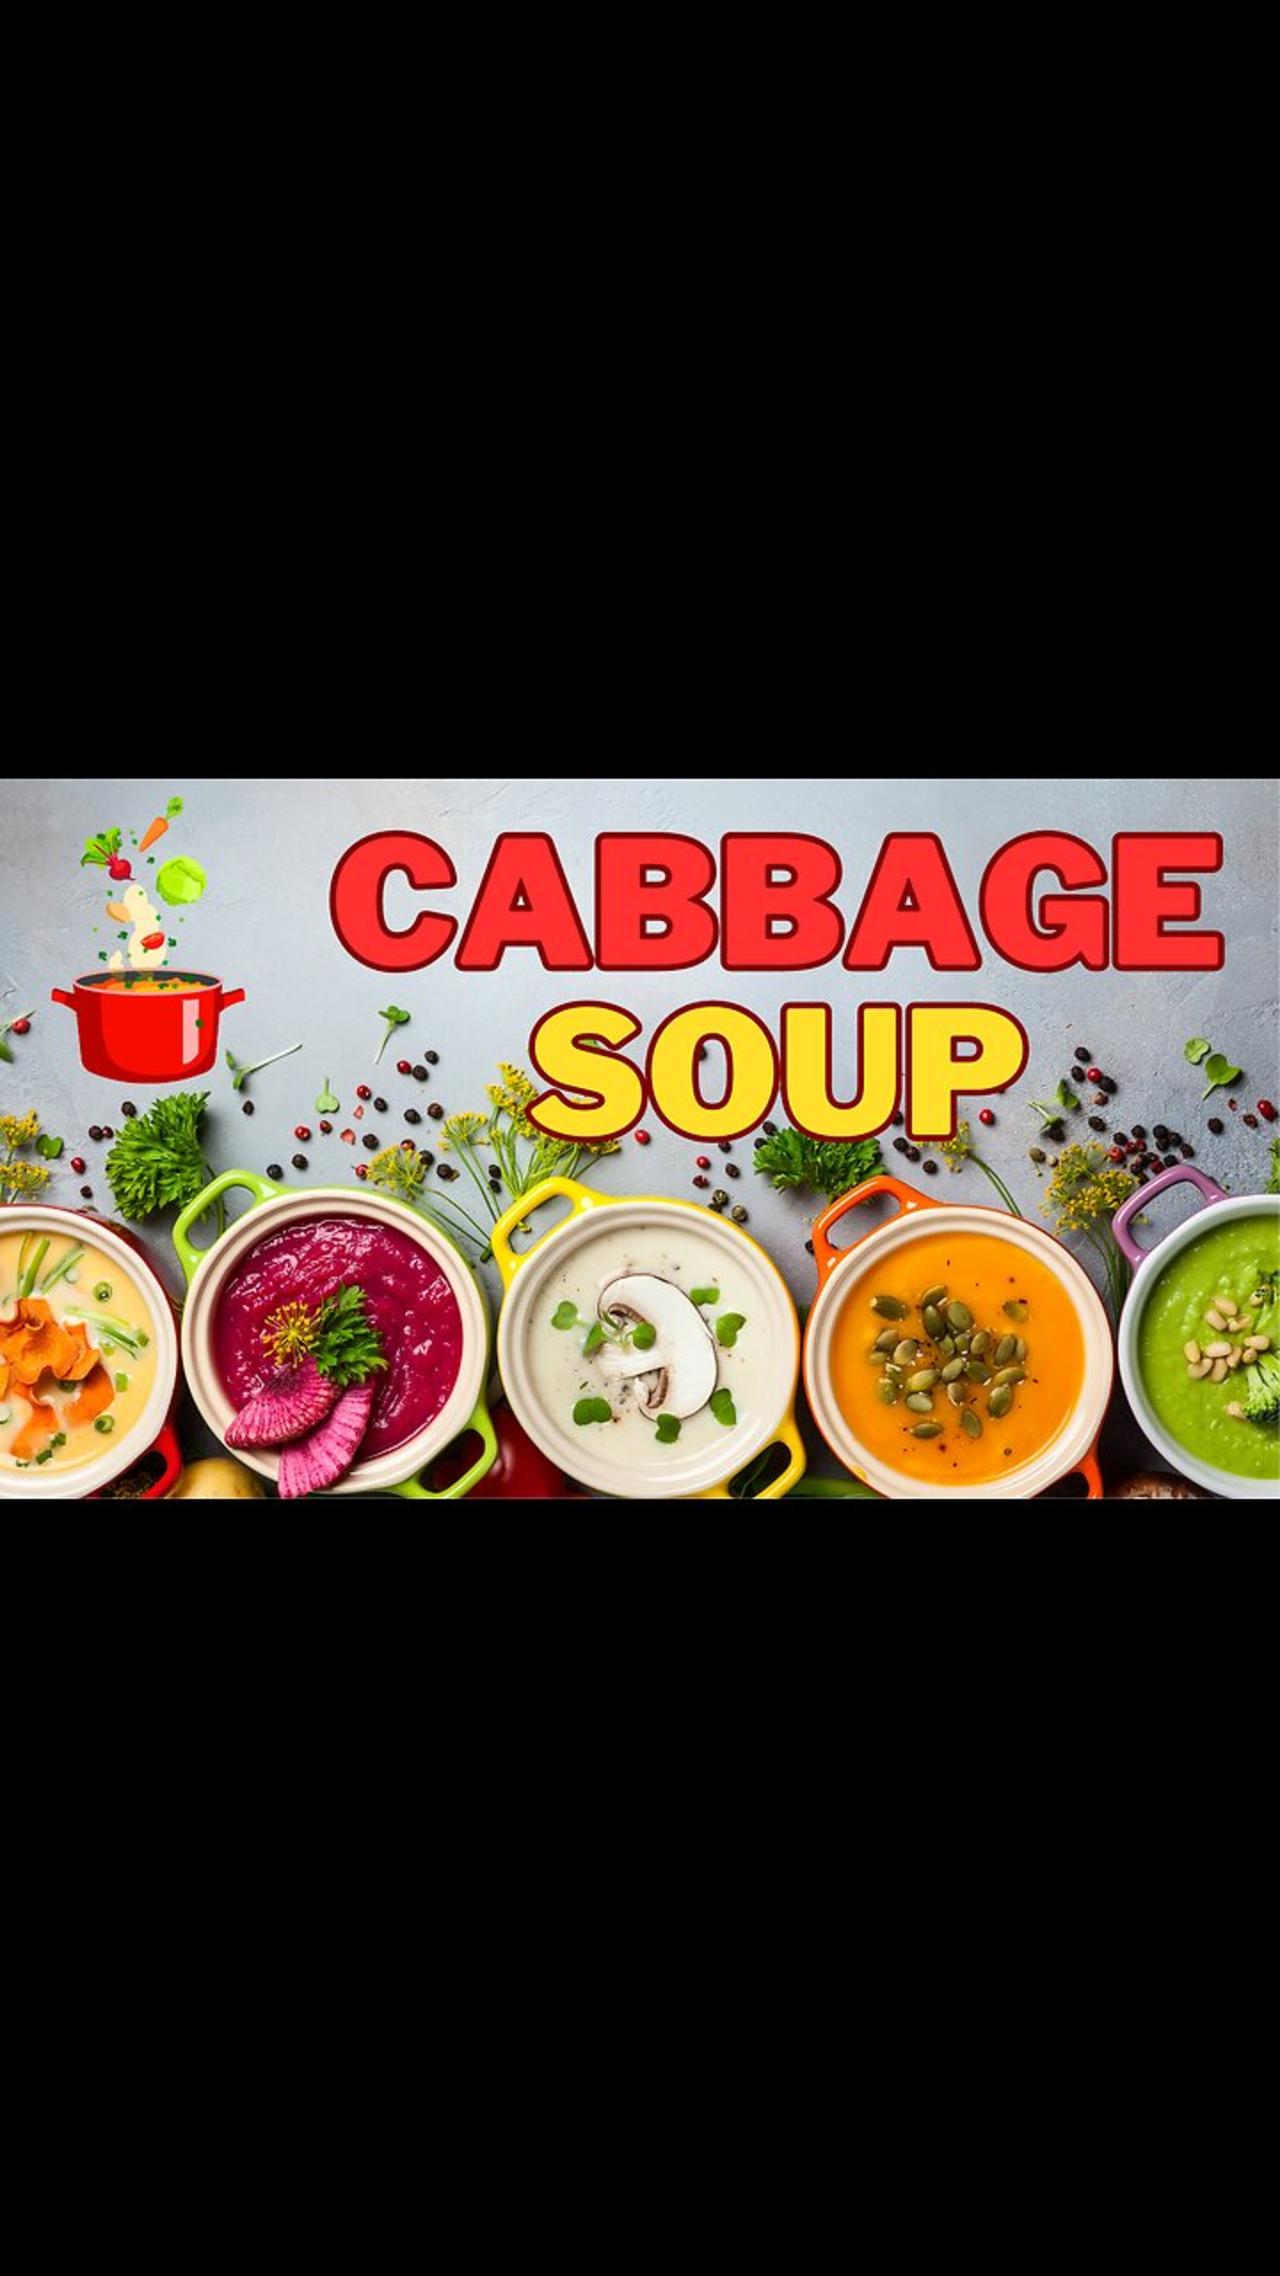 "Cabbage Soup: The Ultimate Plant-based Recipe for a Healthy Keto Diet by Nutrition